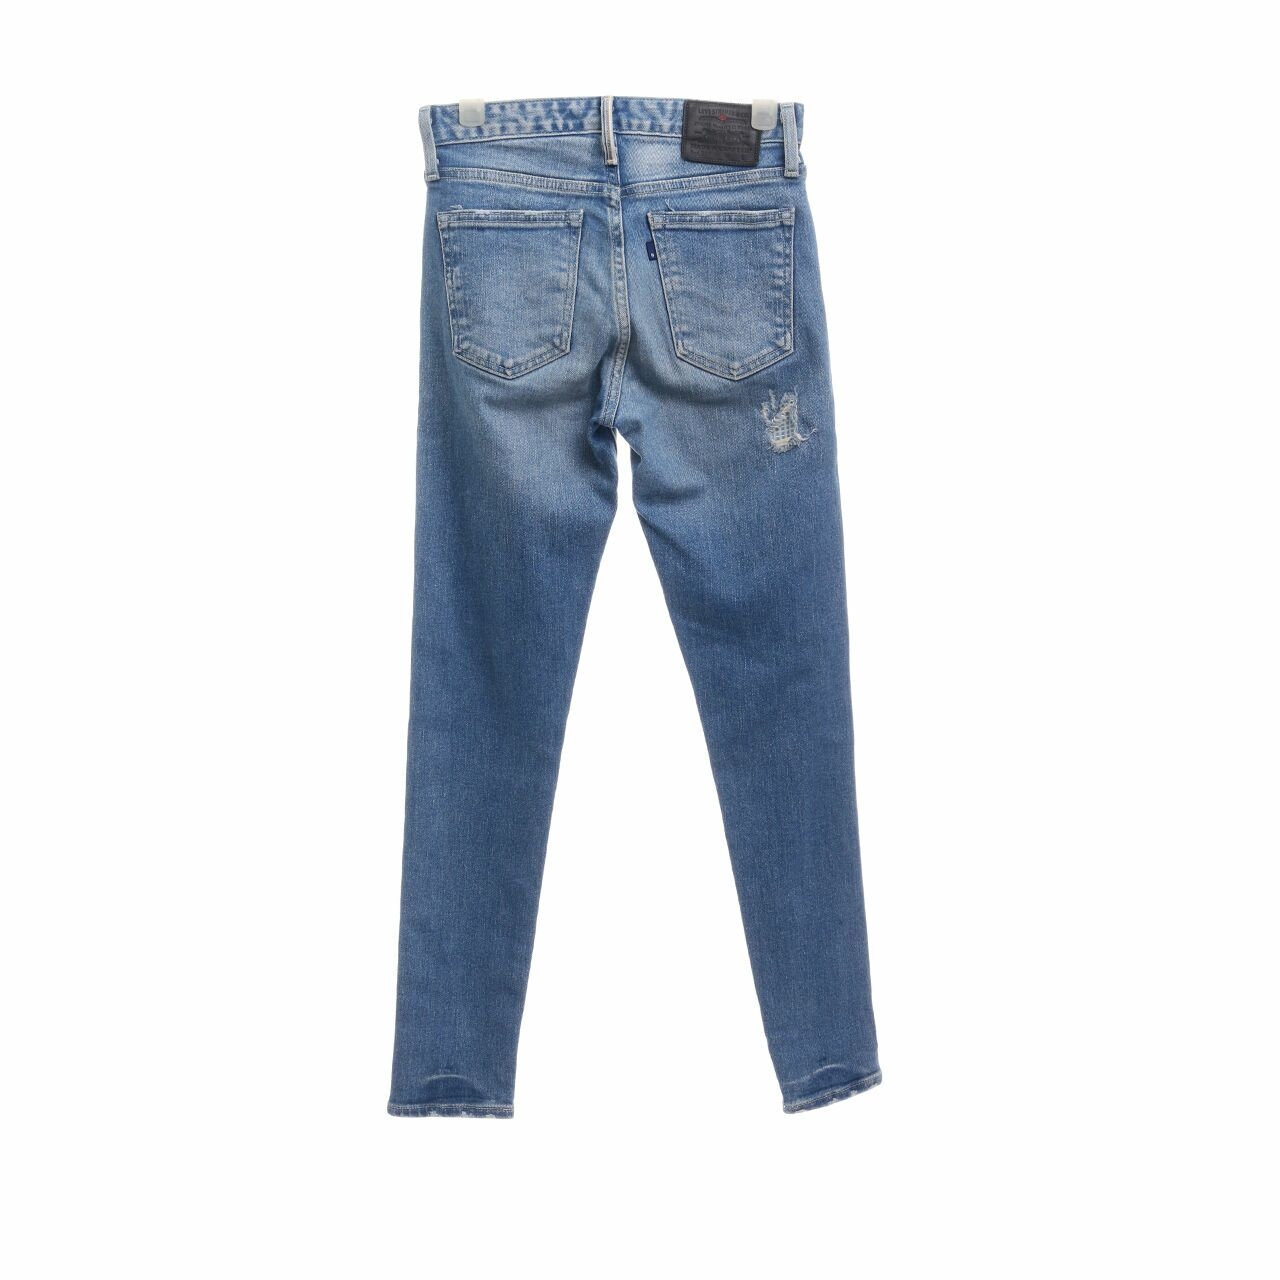 Levi's Blue Ripped Jeans